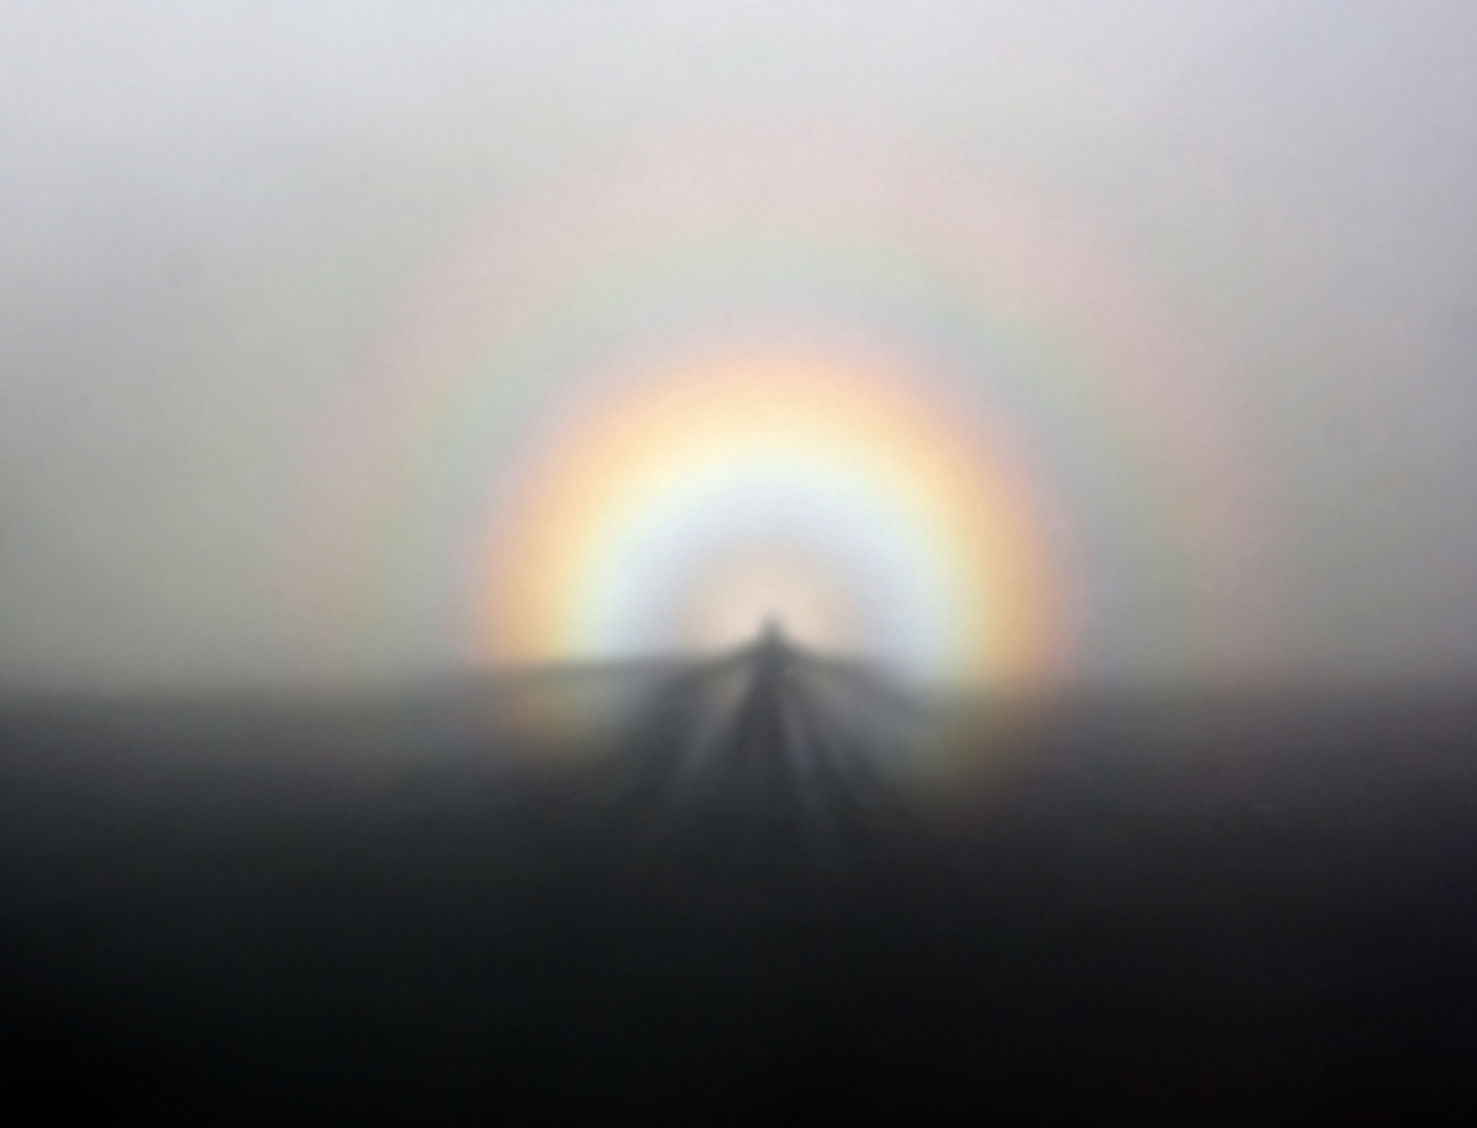 Broken Spectre, a double rainbow wrapped around a person's silhouette